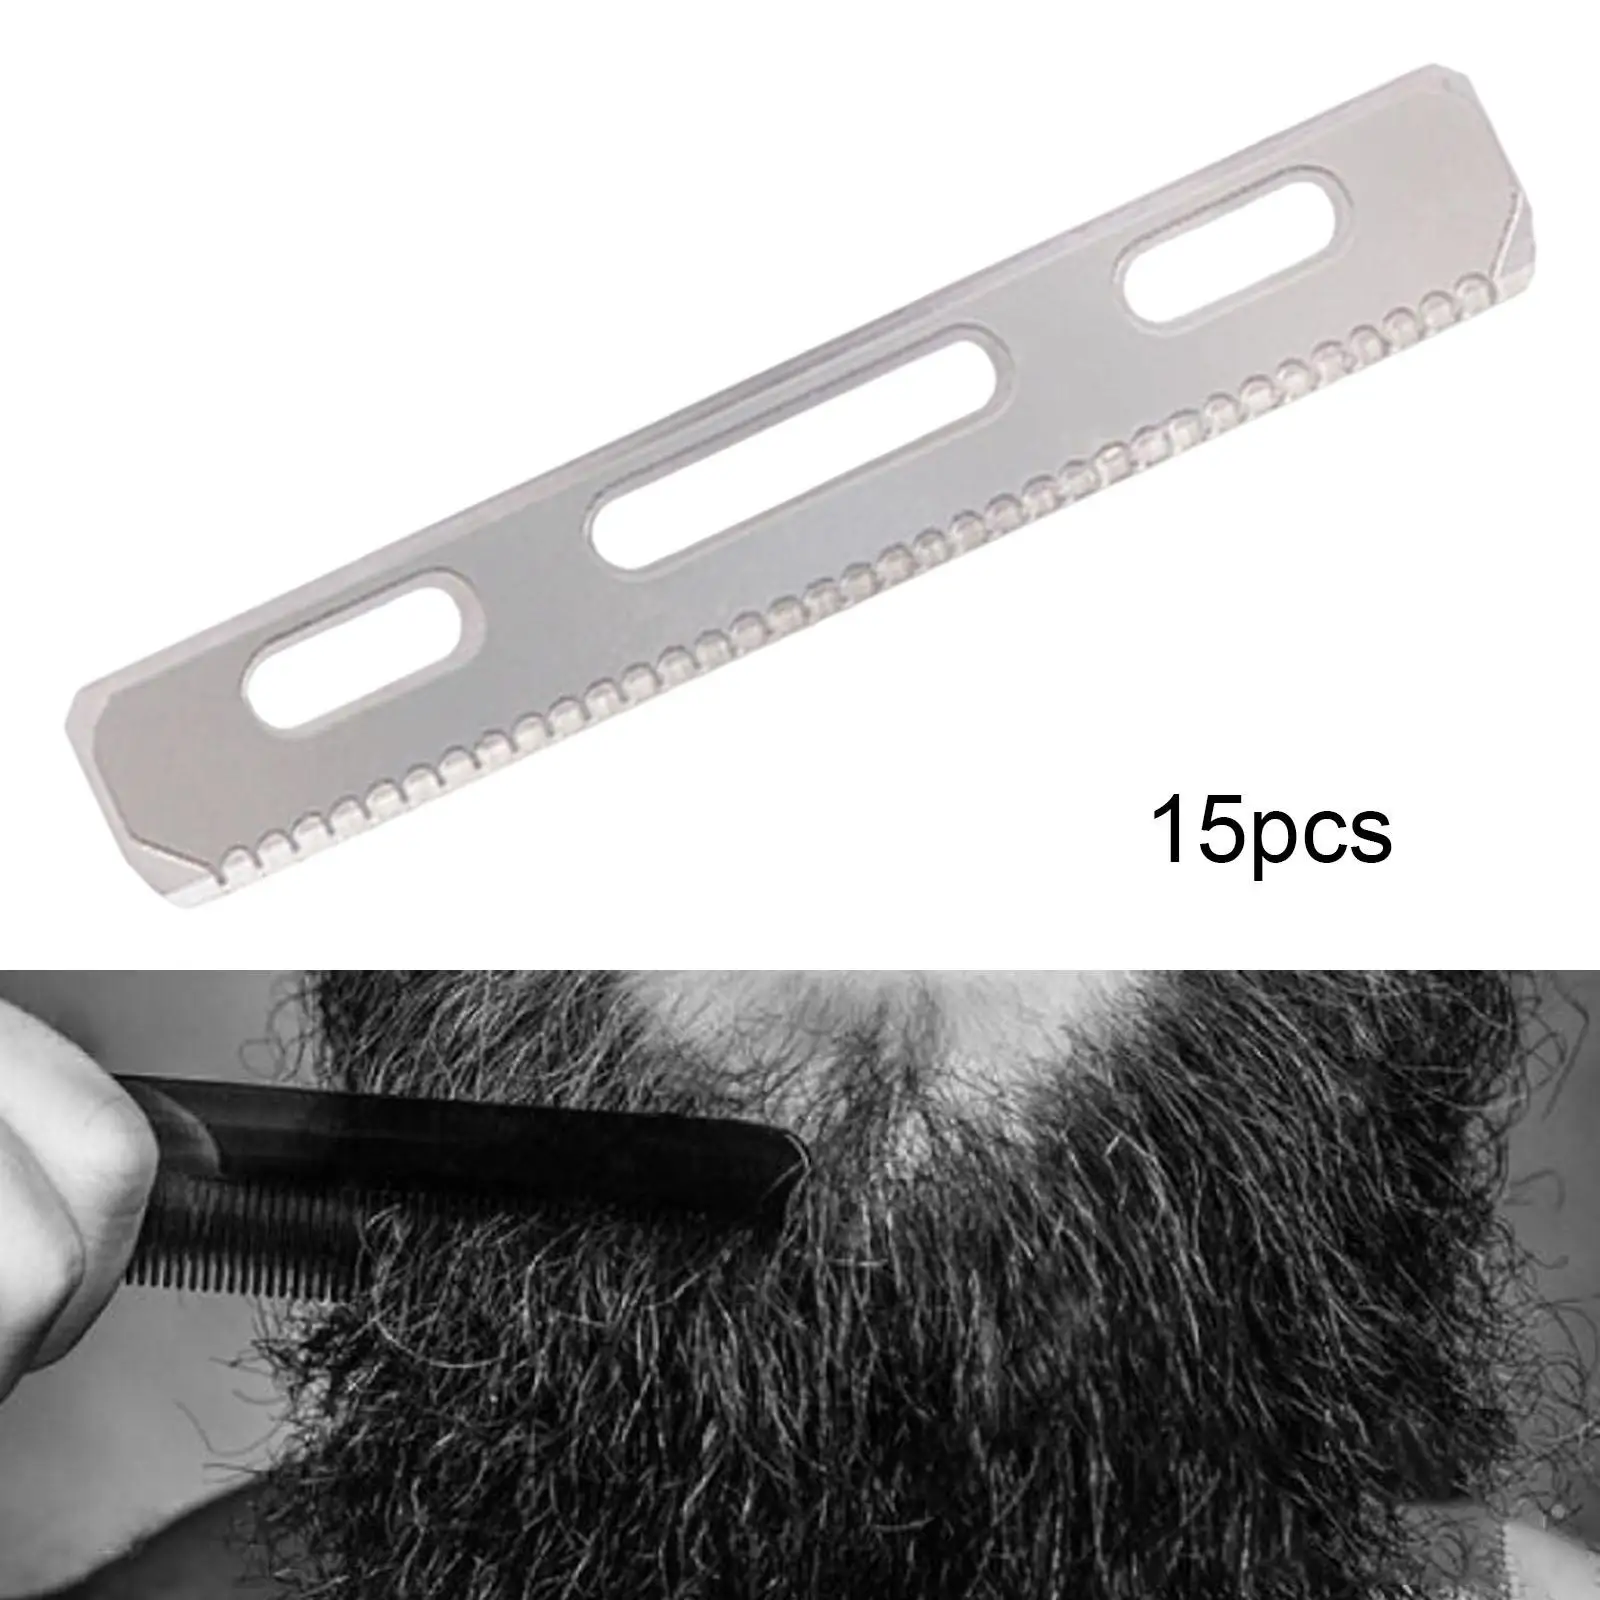 Eyebrow Trimmer Scraper with Cover Facial Stainless Steel Makeup Eyebrow Shaping Shaver Knife for Women Men